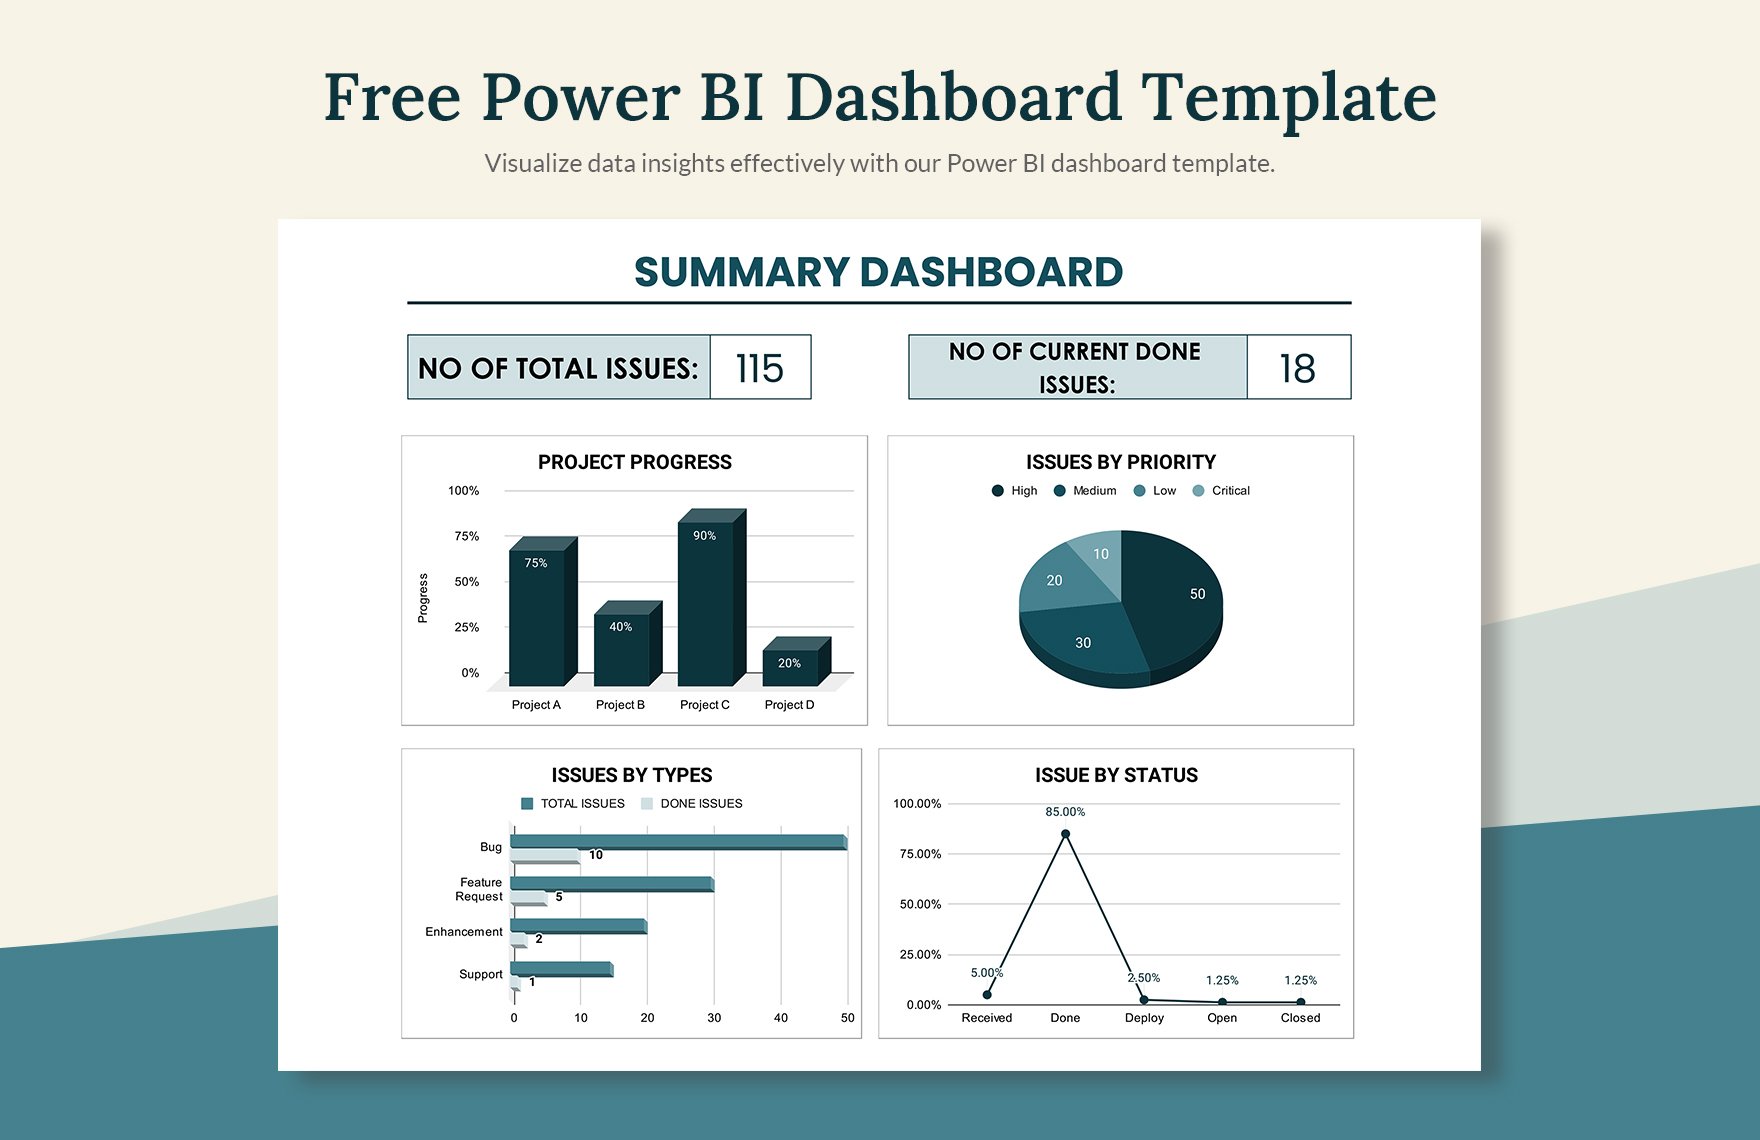 Free Power BI Dashboard Template in Excel, Google Sheets